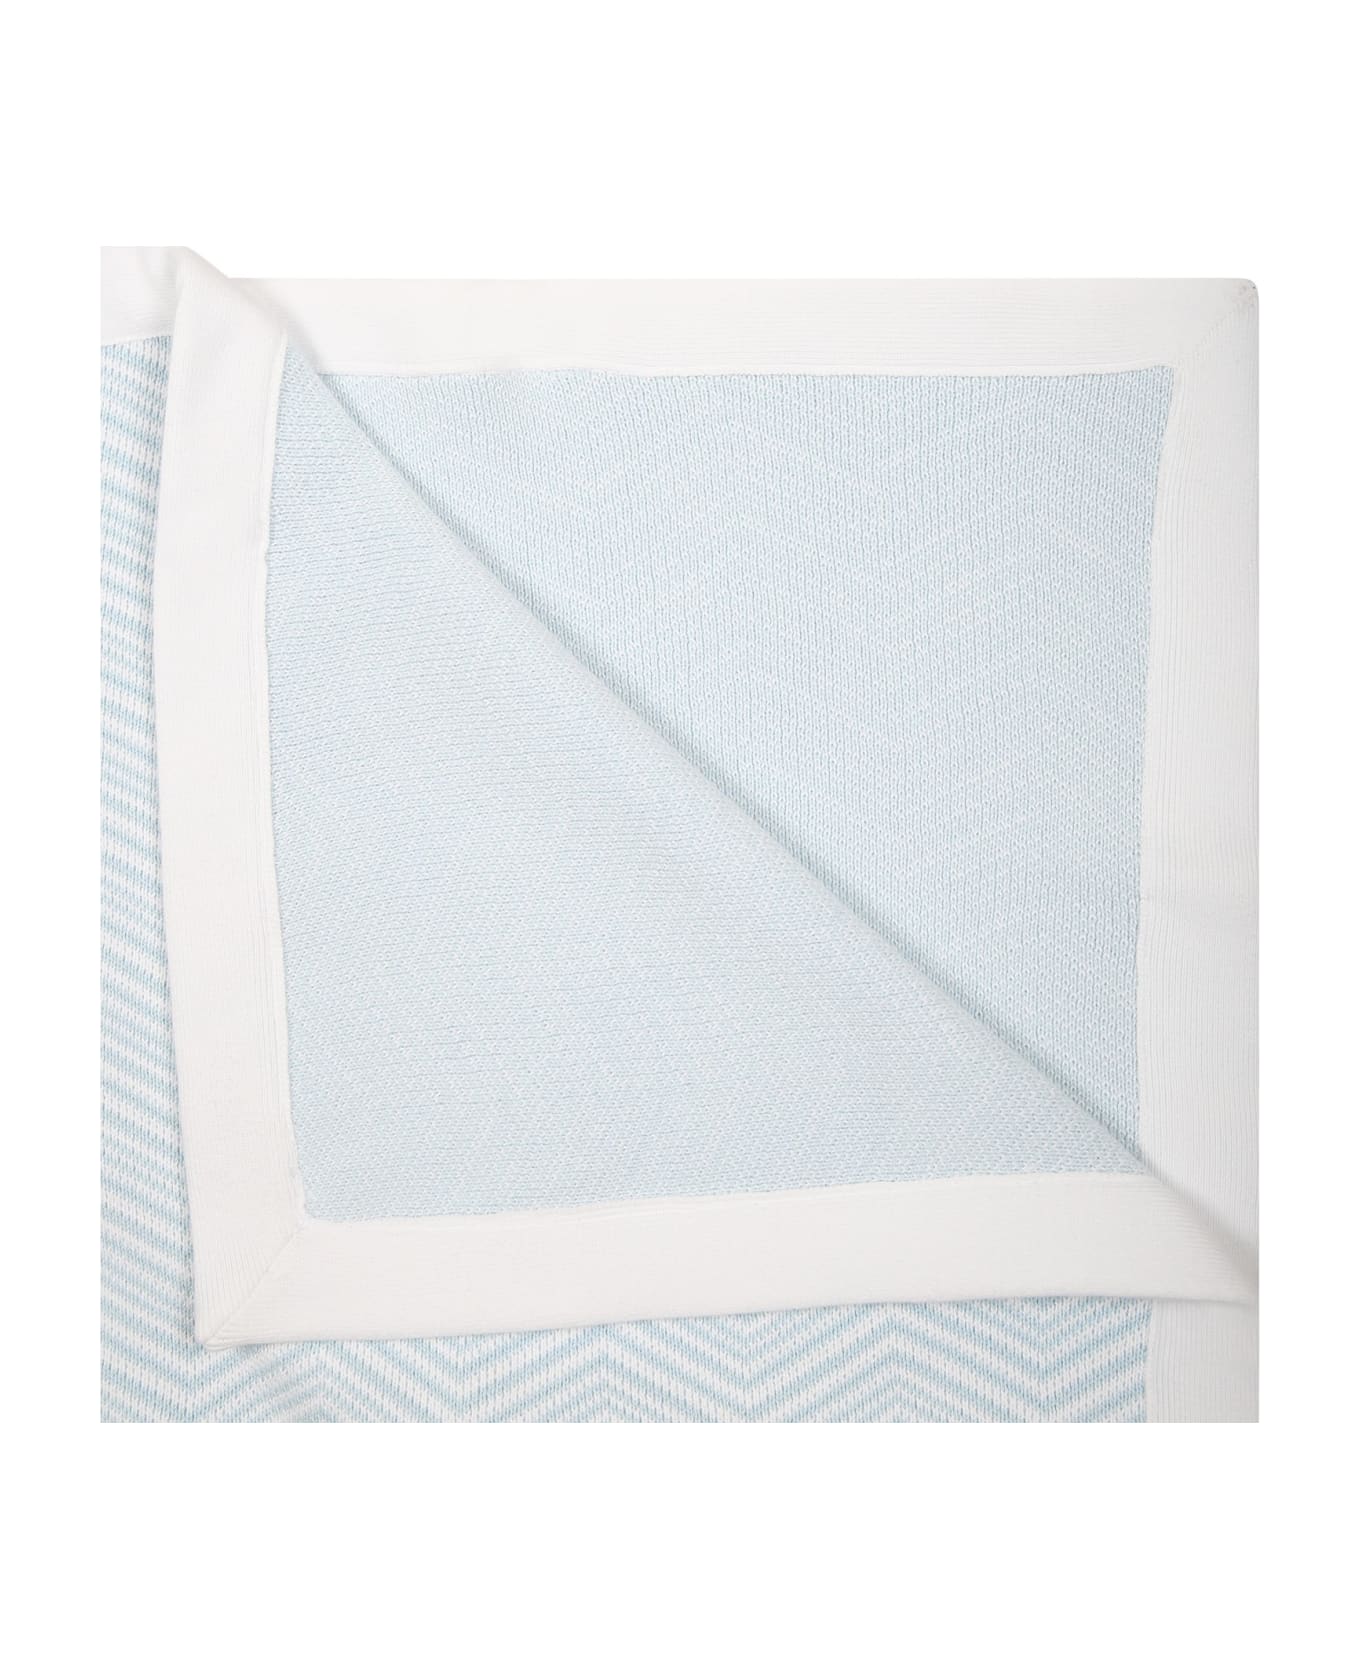 Missoni Light Blue Blanket For Baby Boy With Chevron Pattern - Light Blue アクセサリー＆ギフト